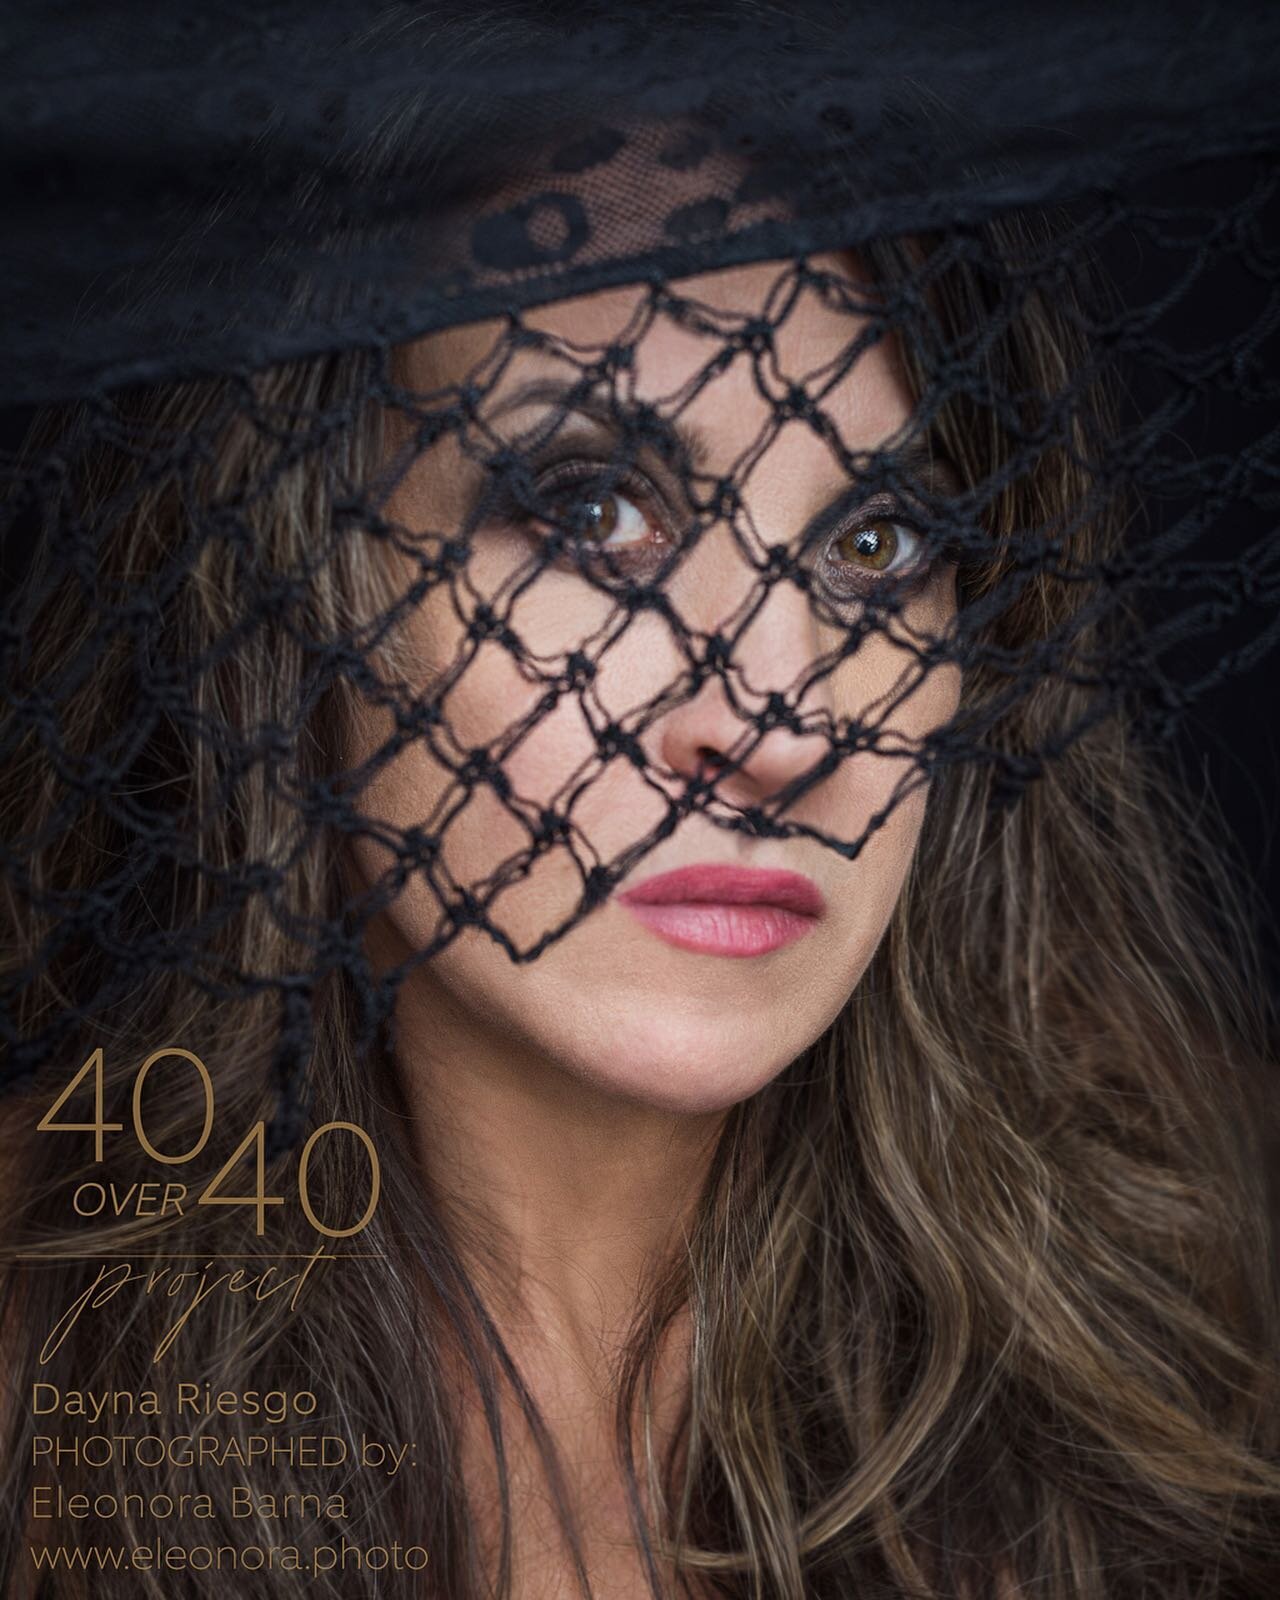 40 over 40 project is in full swing! I can&rsquo;t wait to share more amazing stories and images. Her&rsquo;s another of the beautiful and Incredible Dayna who wears many hats. I have never met another person who does so much sooooo well. Organizing 